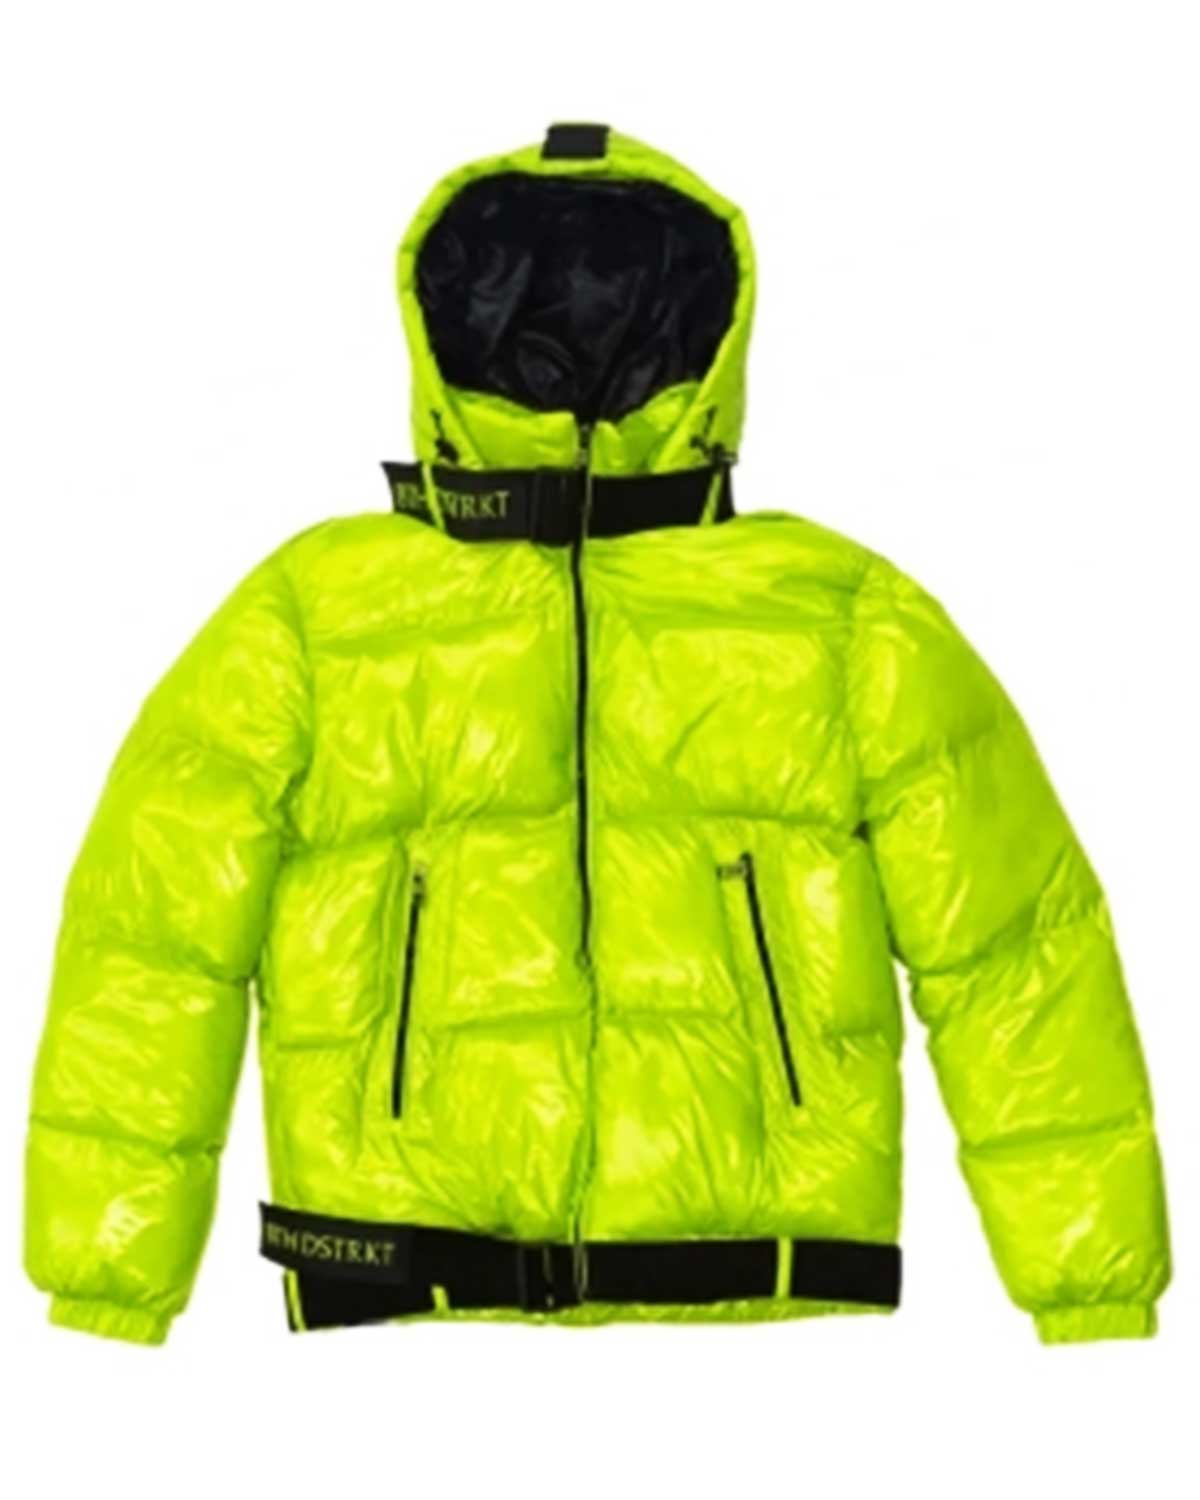 8th District With Hood Puffer Jacket | Elite Jacket